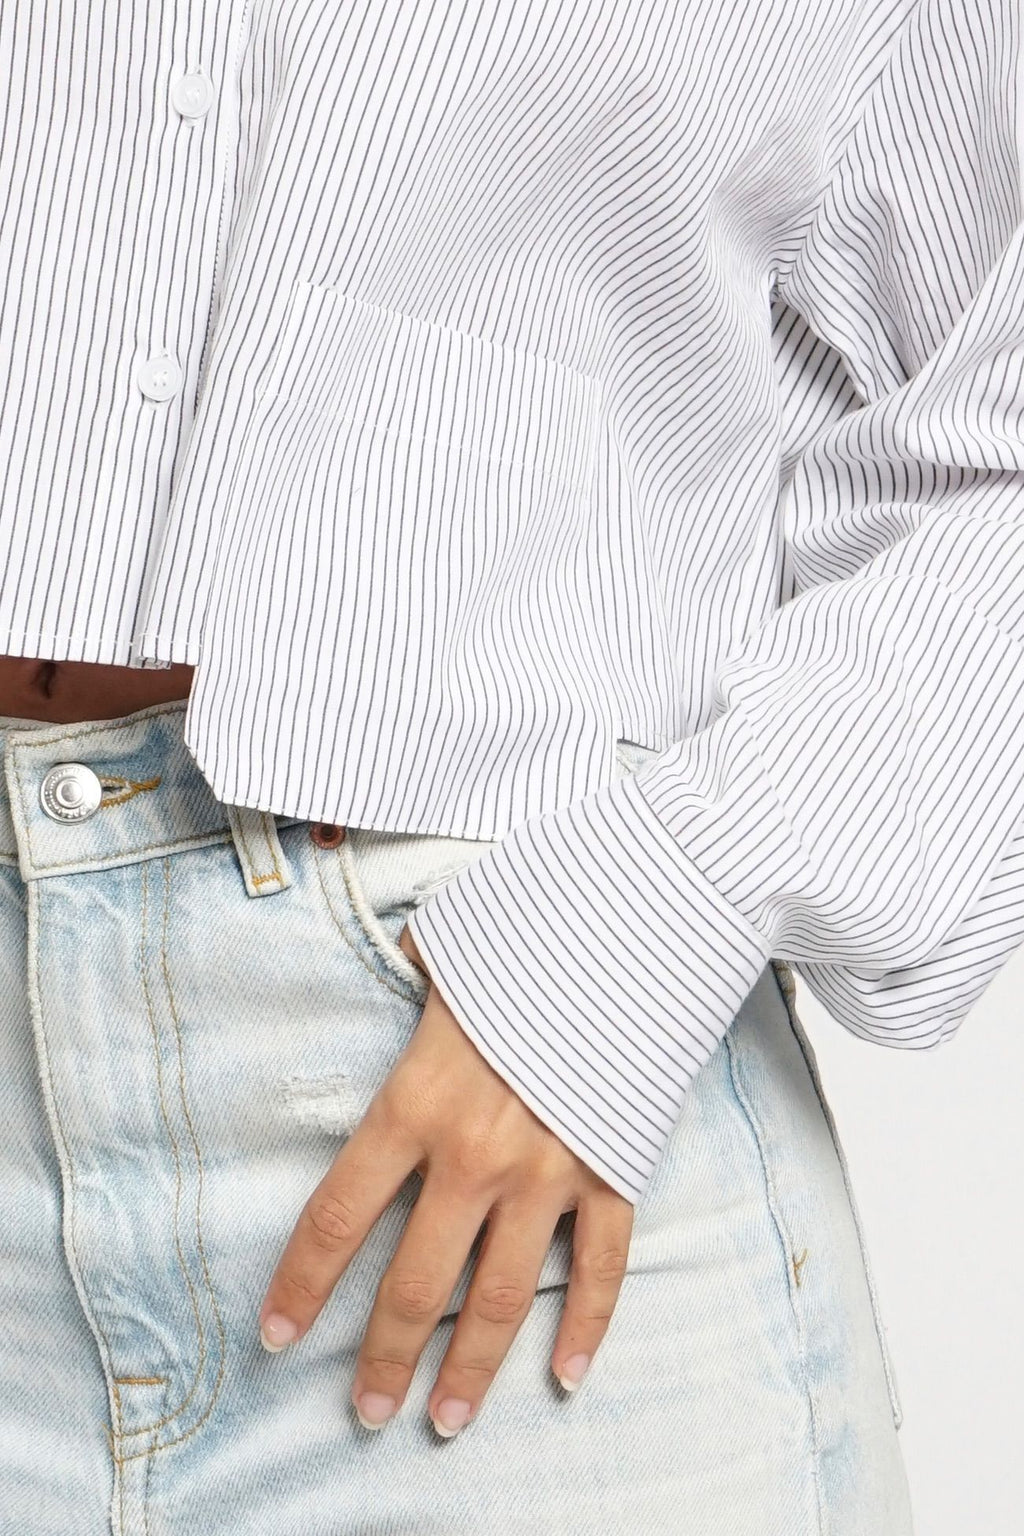 White Cropped button up Tshirt